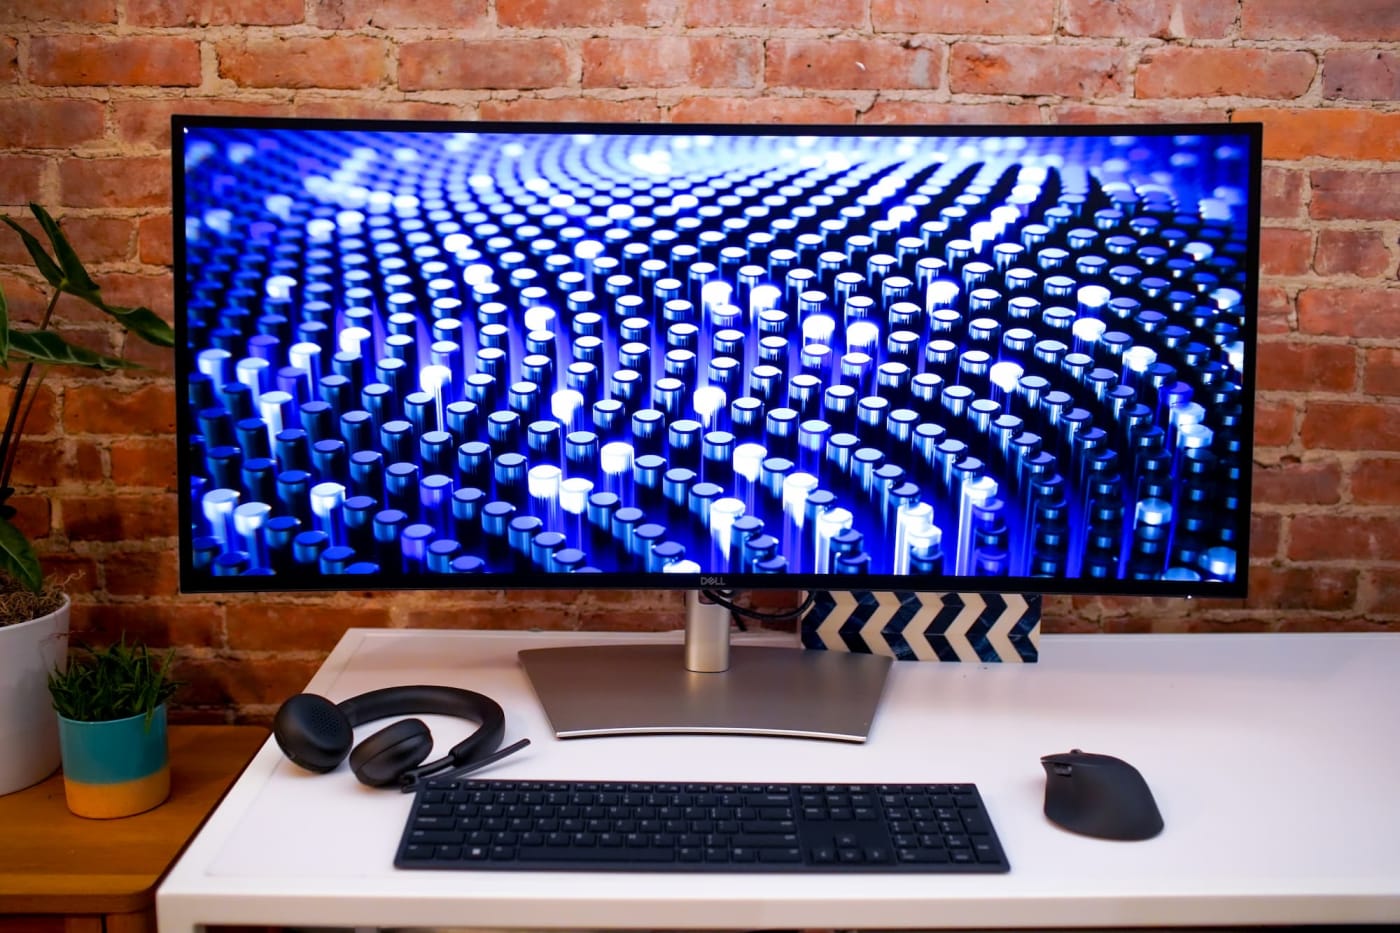 Dell unveils its curved 40-inch 5K monitor at CES, claiming 'five-star eye comfort'